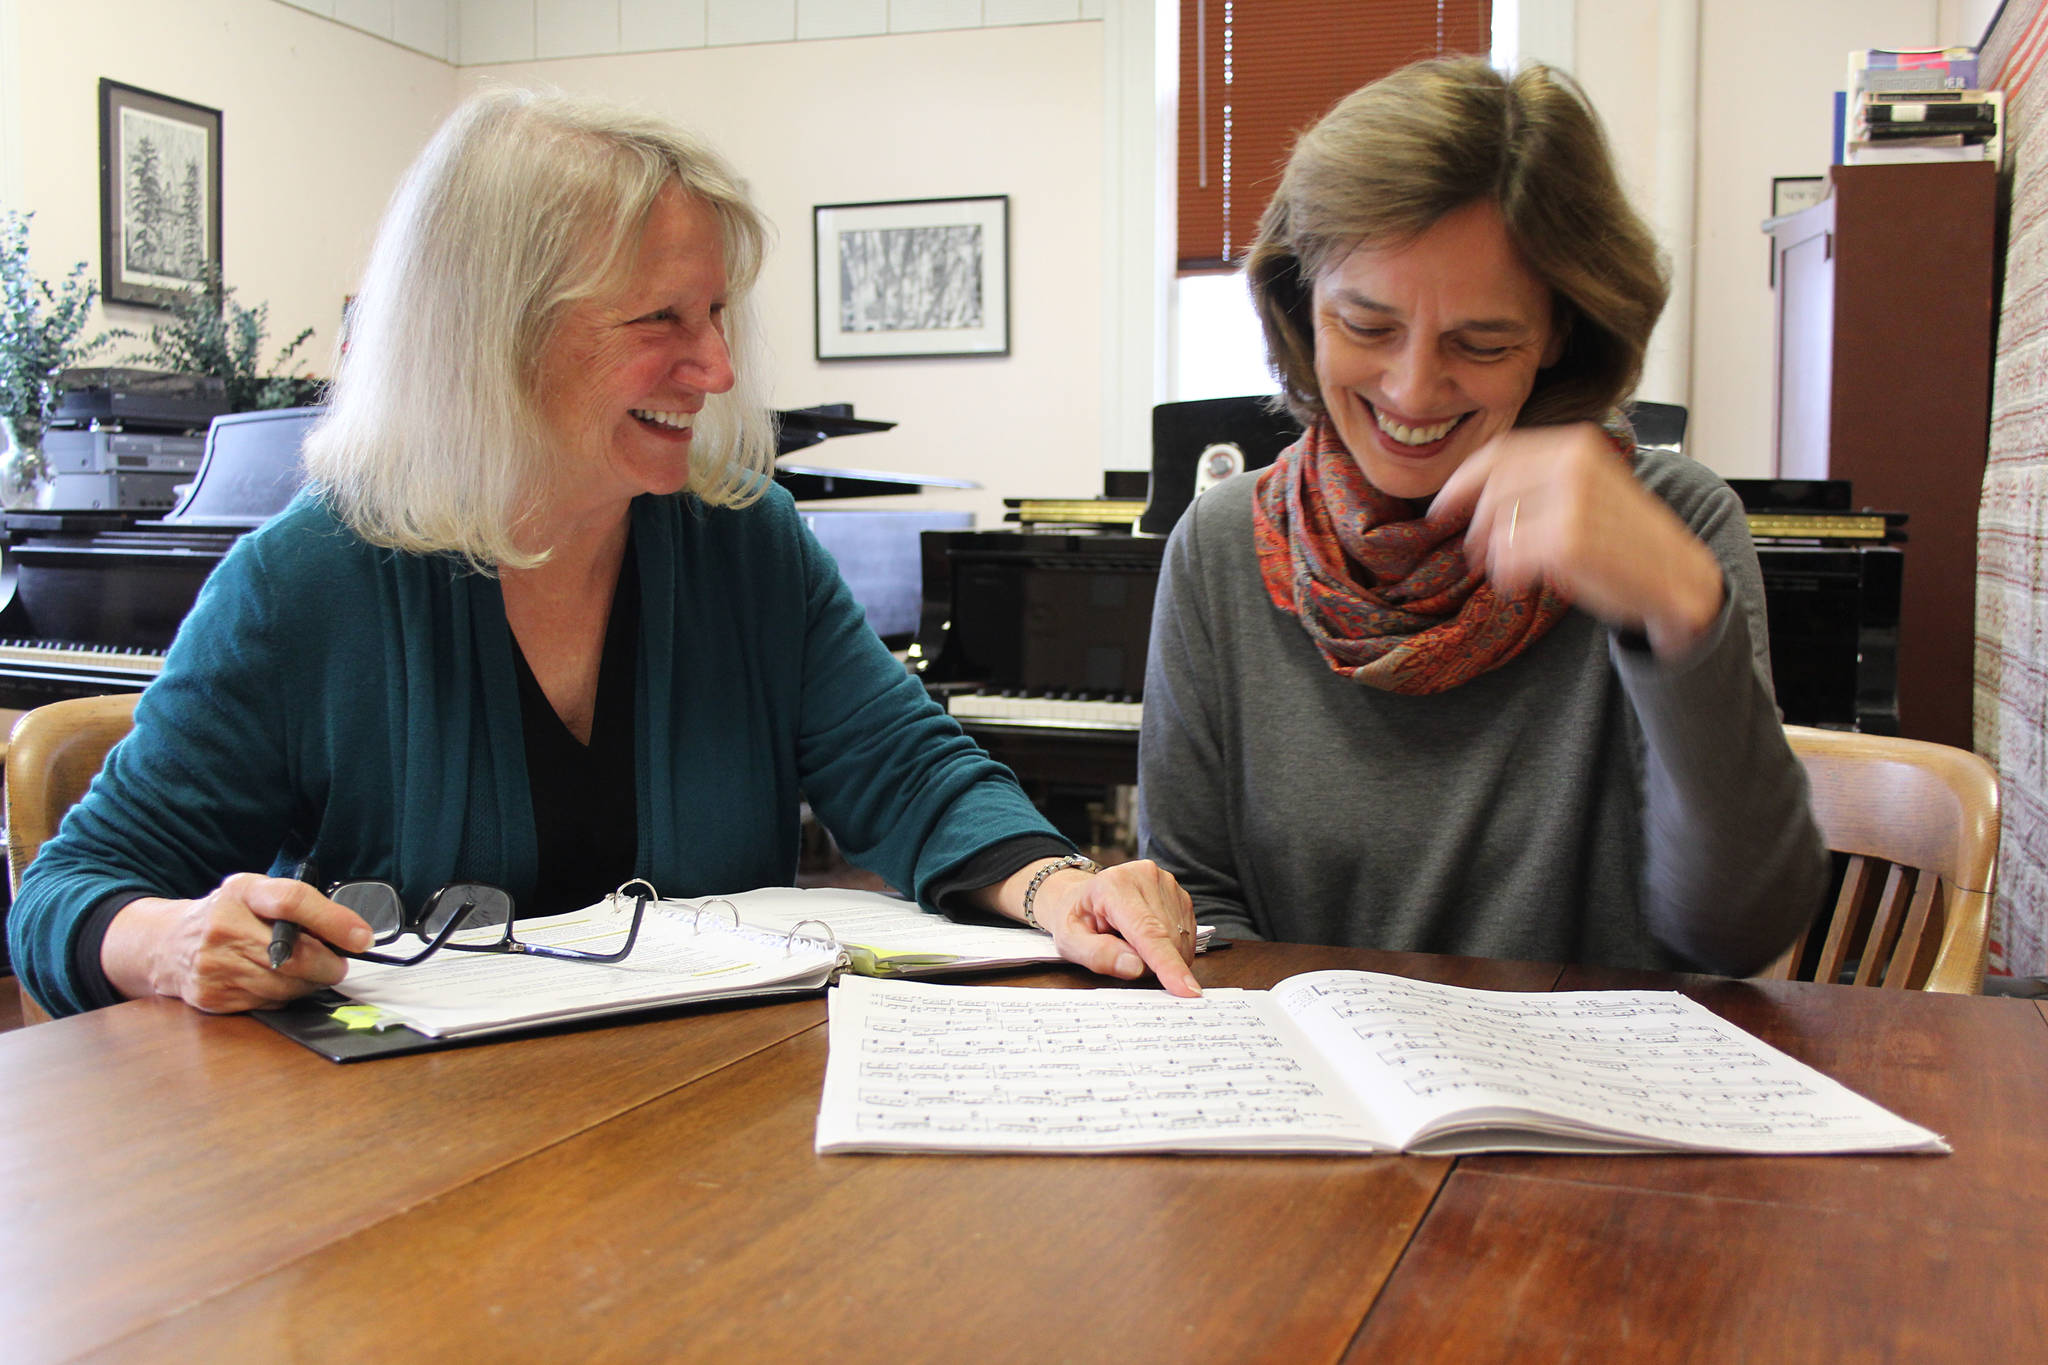 Concert pianist Rachelle McCabe is pictured with environmental advocate Kathleen Dean Moore. (Courtesy Photo)